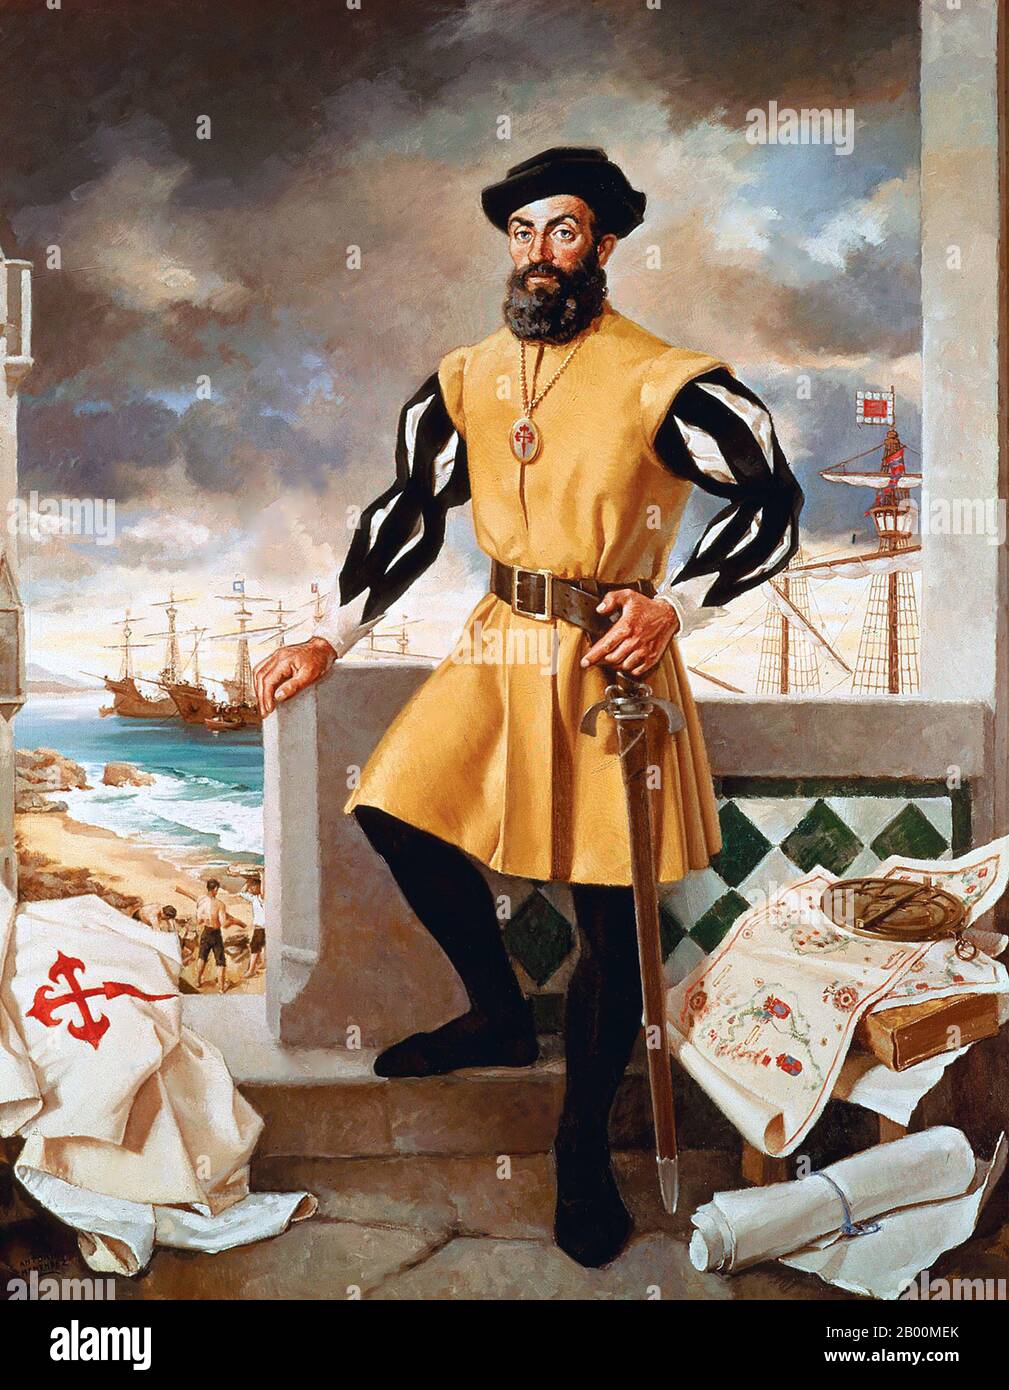 https://c8.alamy.com/comp/2B00MEK/portugal-ferdinand-magellan-1480-1521-portuguese-explorer-and-circumnavigator-ferdinand-magellan-c-1480-april-27-1521-was-a-portuguese-explorer-he-was-born-at-sabrosa-in-northern-portugal-but-later-obtained-spanish-nationality-in-order-to-serve-king-charles-i-of-spain-in-search-of-a-westward-route-to-the-spice-islands-modern-maluku-islands-in-indonesia-magellans-expedition-of-1519-1522-became-the-first-expedition-to-sail-from-the-atlantic-ocean-into-the-pacific-ocean-and-the-first-to-cross-the-pacific-it-also-completed-the-first-circumnavigation-of-the-globe-2B00MEK.jpg